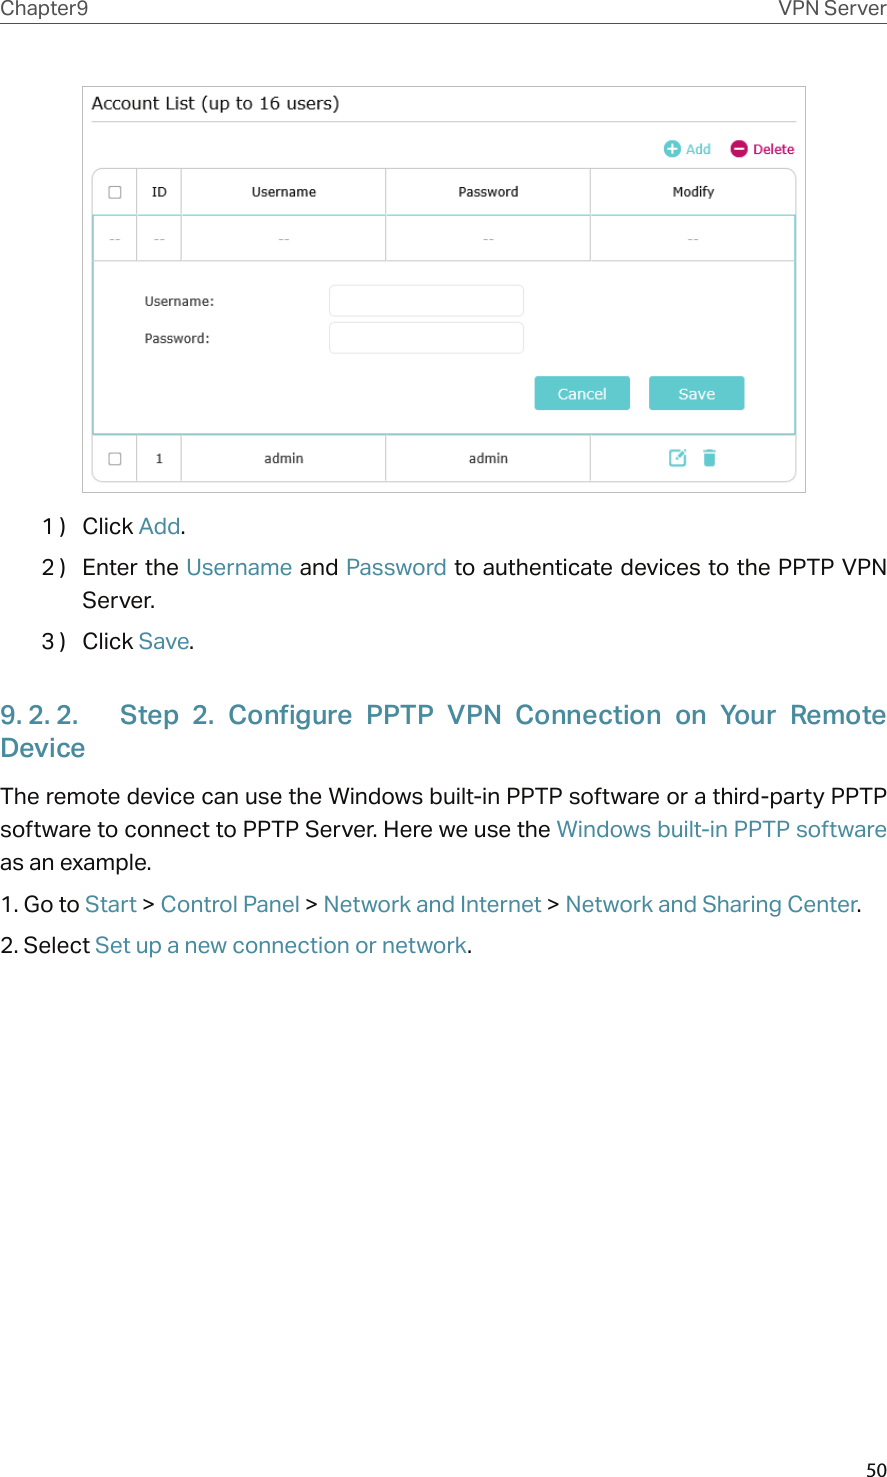 50Chapter9 VPN Server1 )  Click Add.2 )  Enter the Username and Password to authenticate devices to the PPTP VPN Server.3 )  Click Save.9. 2. 2.  Step  2.  Configure  PPTP  VPN  Connection  on  Your  Remote DeviceThe remote device can use the Windows built-in PPTP software or a third-party PPTP software to connect to PPTP Server. Here we use the Windows built-in PPTP software as an example.1. Go to Start &gt; Control Panel &gt; Network and Internet &gt; Network and Sharing Center.2. Select Set up a new connection or network.